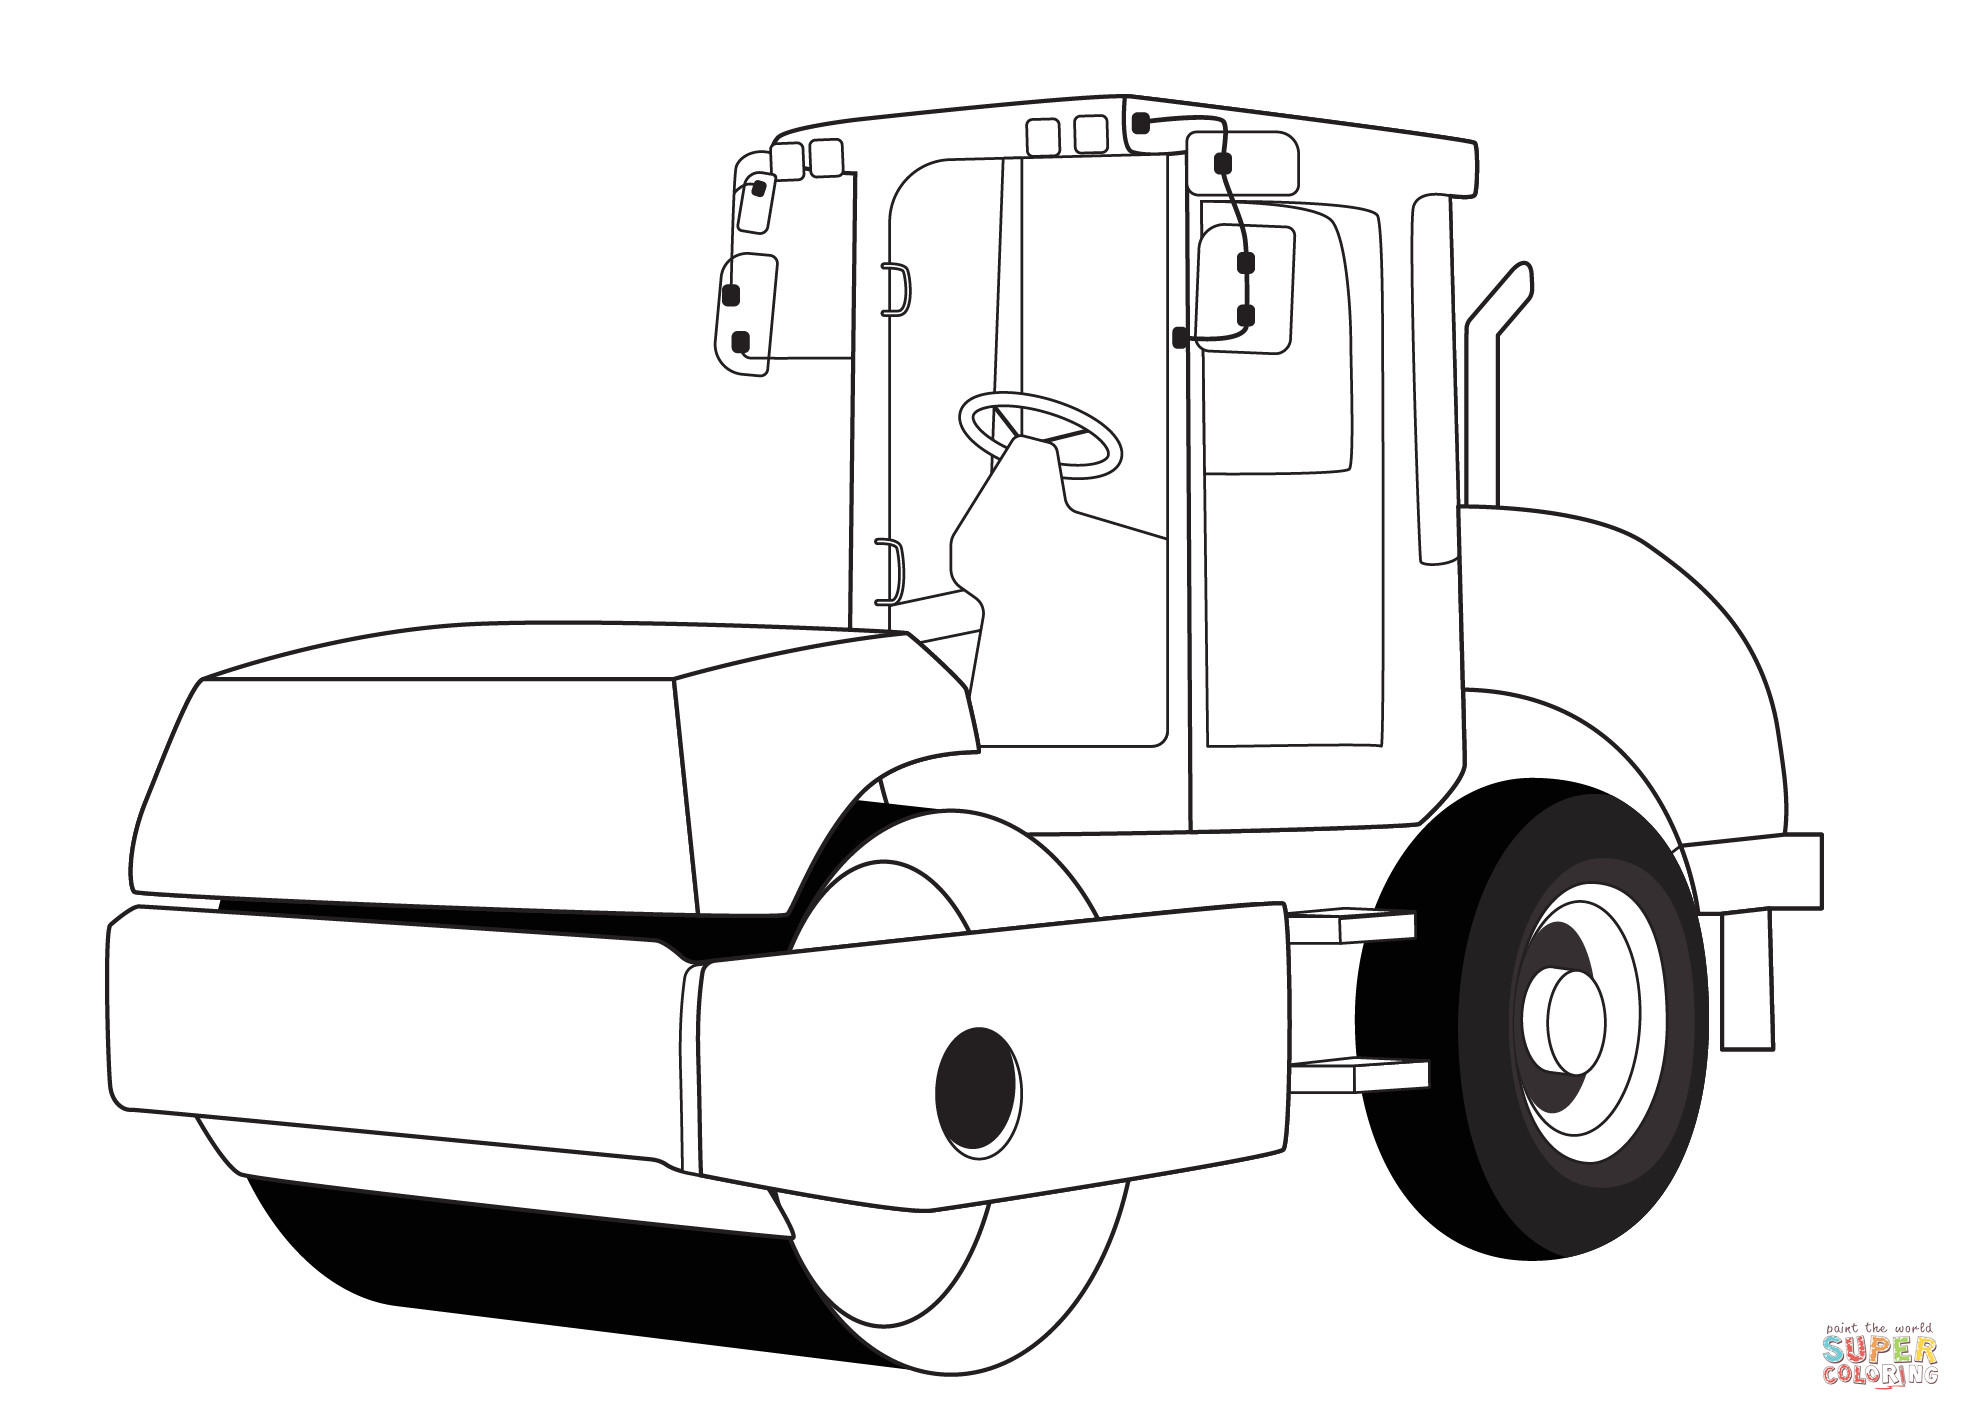 Road roller coloring page free printable coloring pages